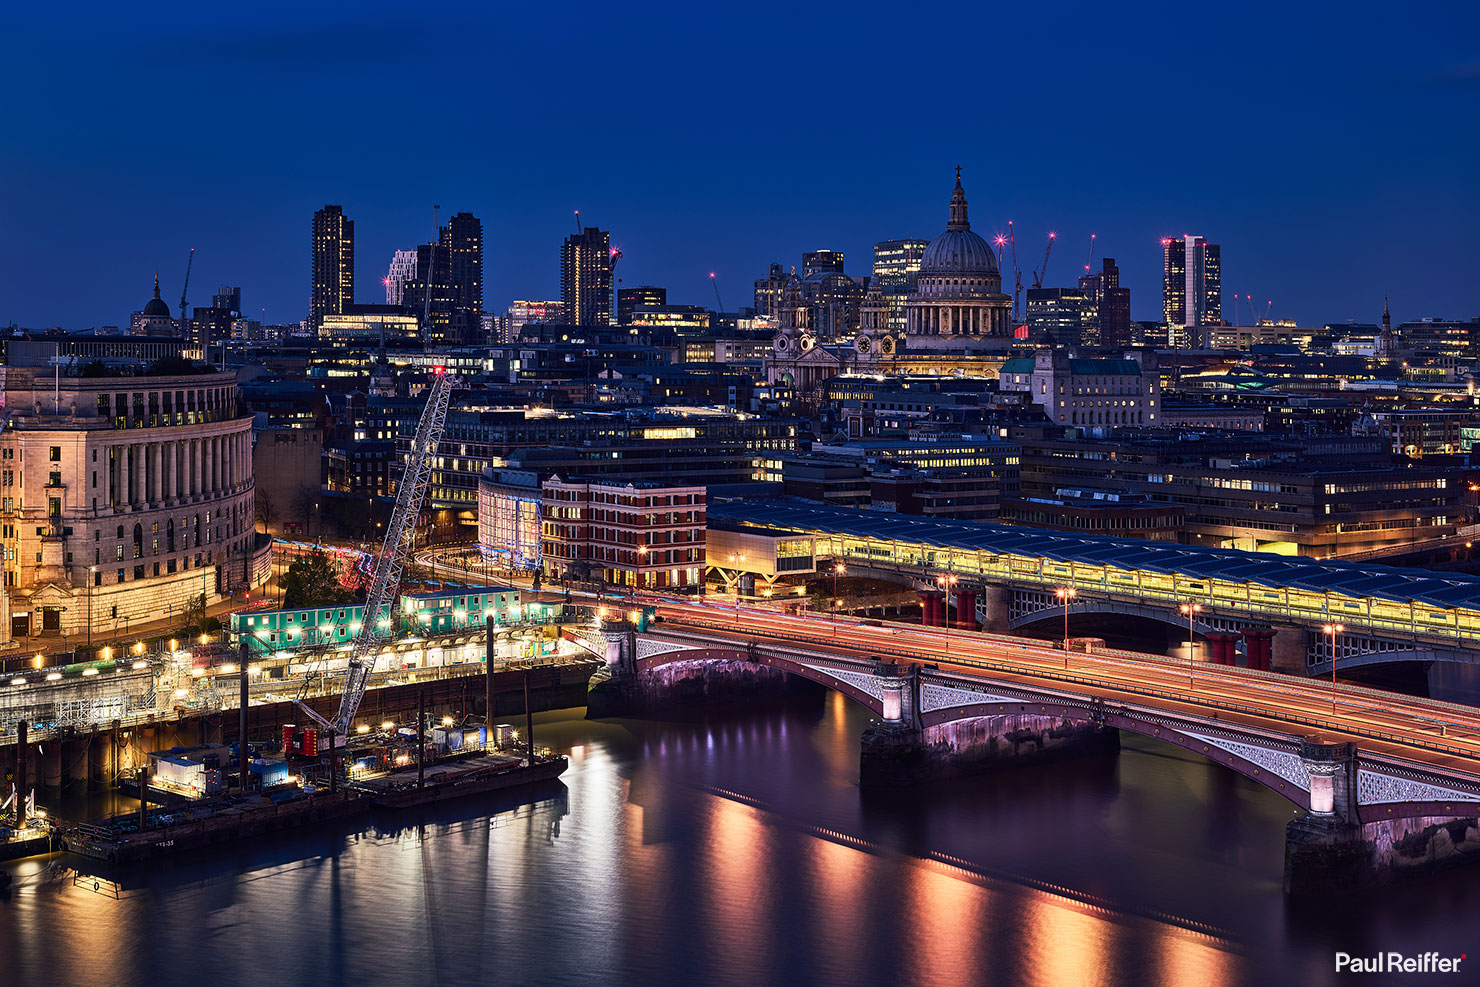 Sea Containers St Pauls Blackfriars Bridge Photography Station Thames Shooting Cityscape London Rooftop Paul Reiffer Night Skyline Phase One England